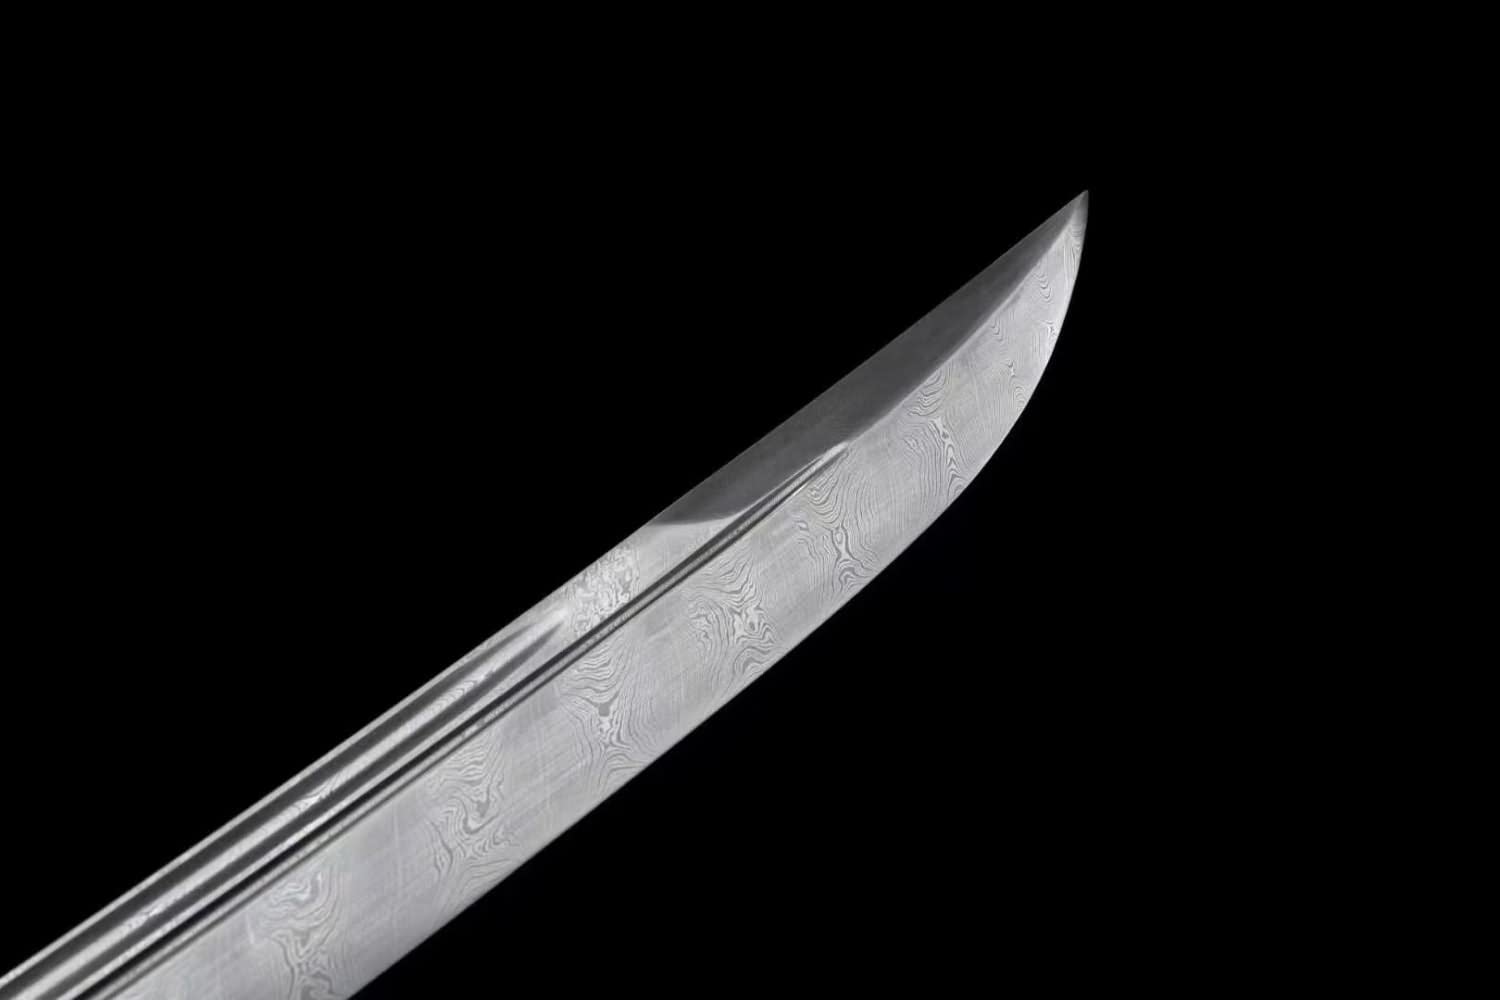 Qing dao,Forged Damascus Steel Blade,Ebony Scabbard,Brass Fittings